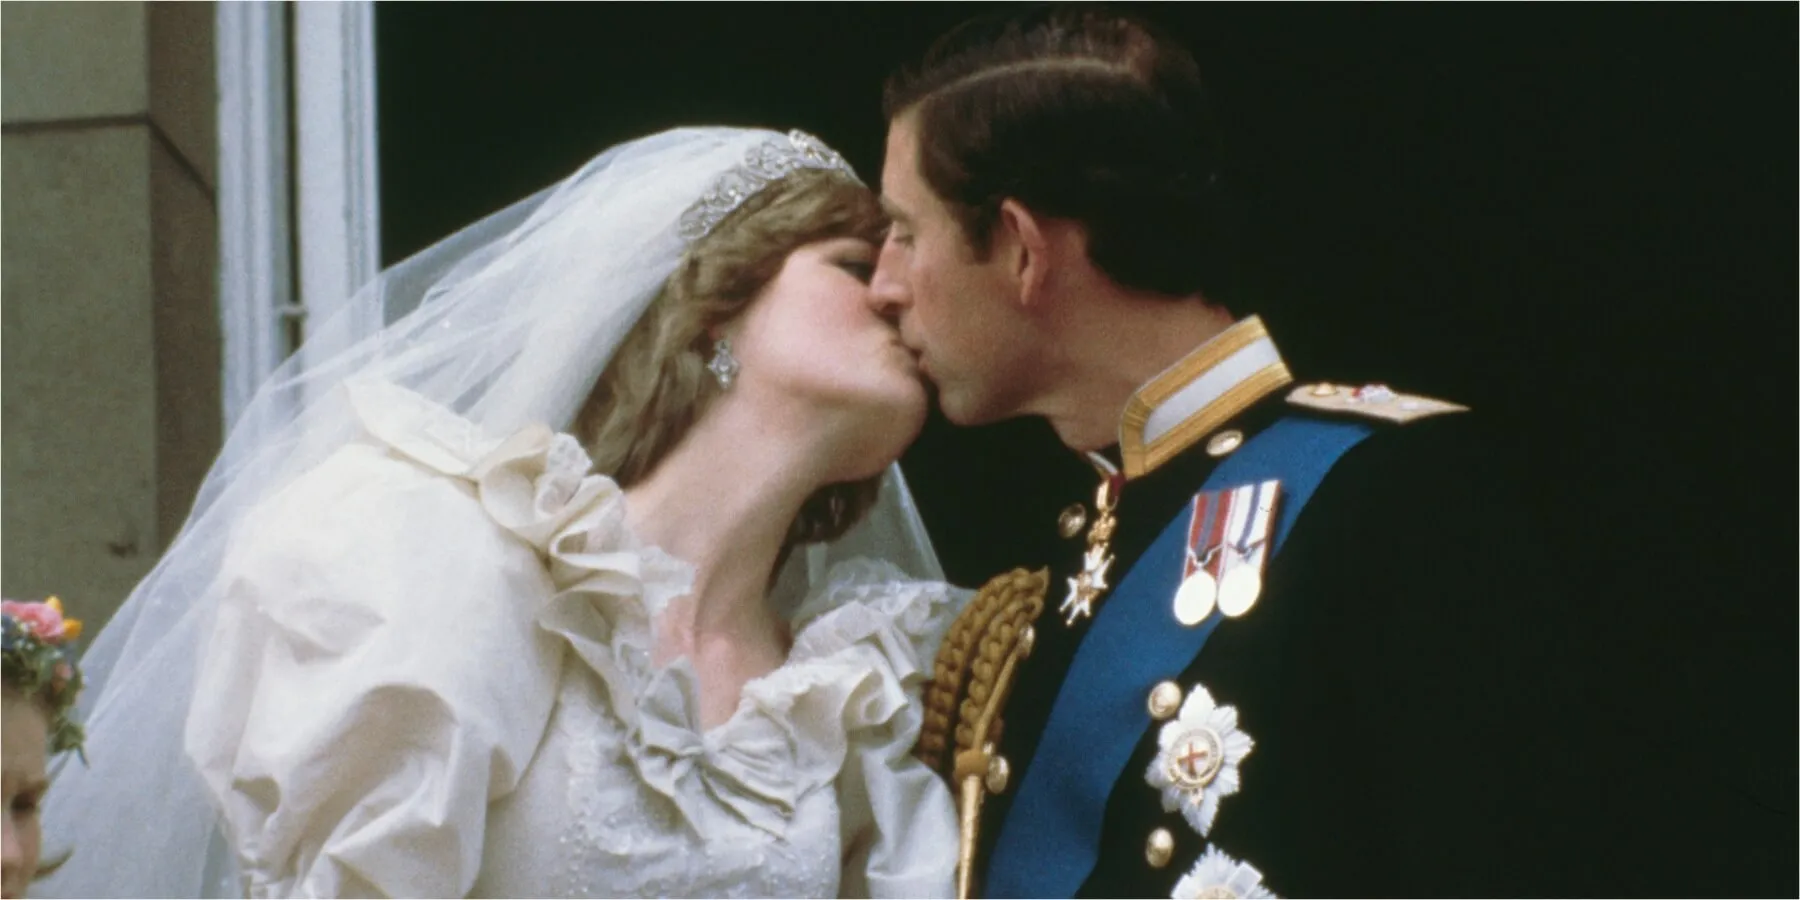 Princess Diana and then-Prince Charles kiss on the Buckingham Palace balcony in July 1981.